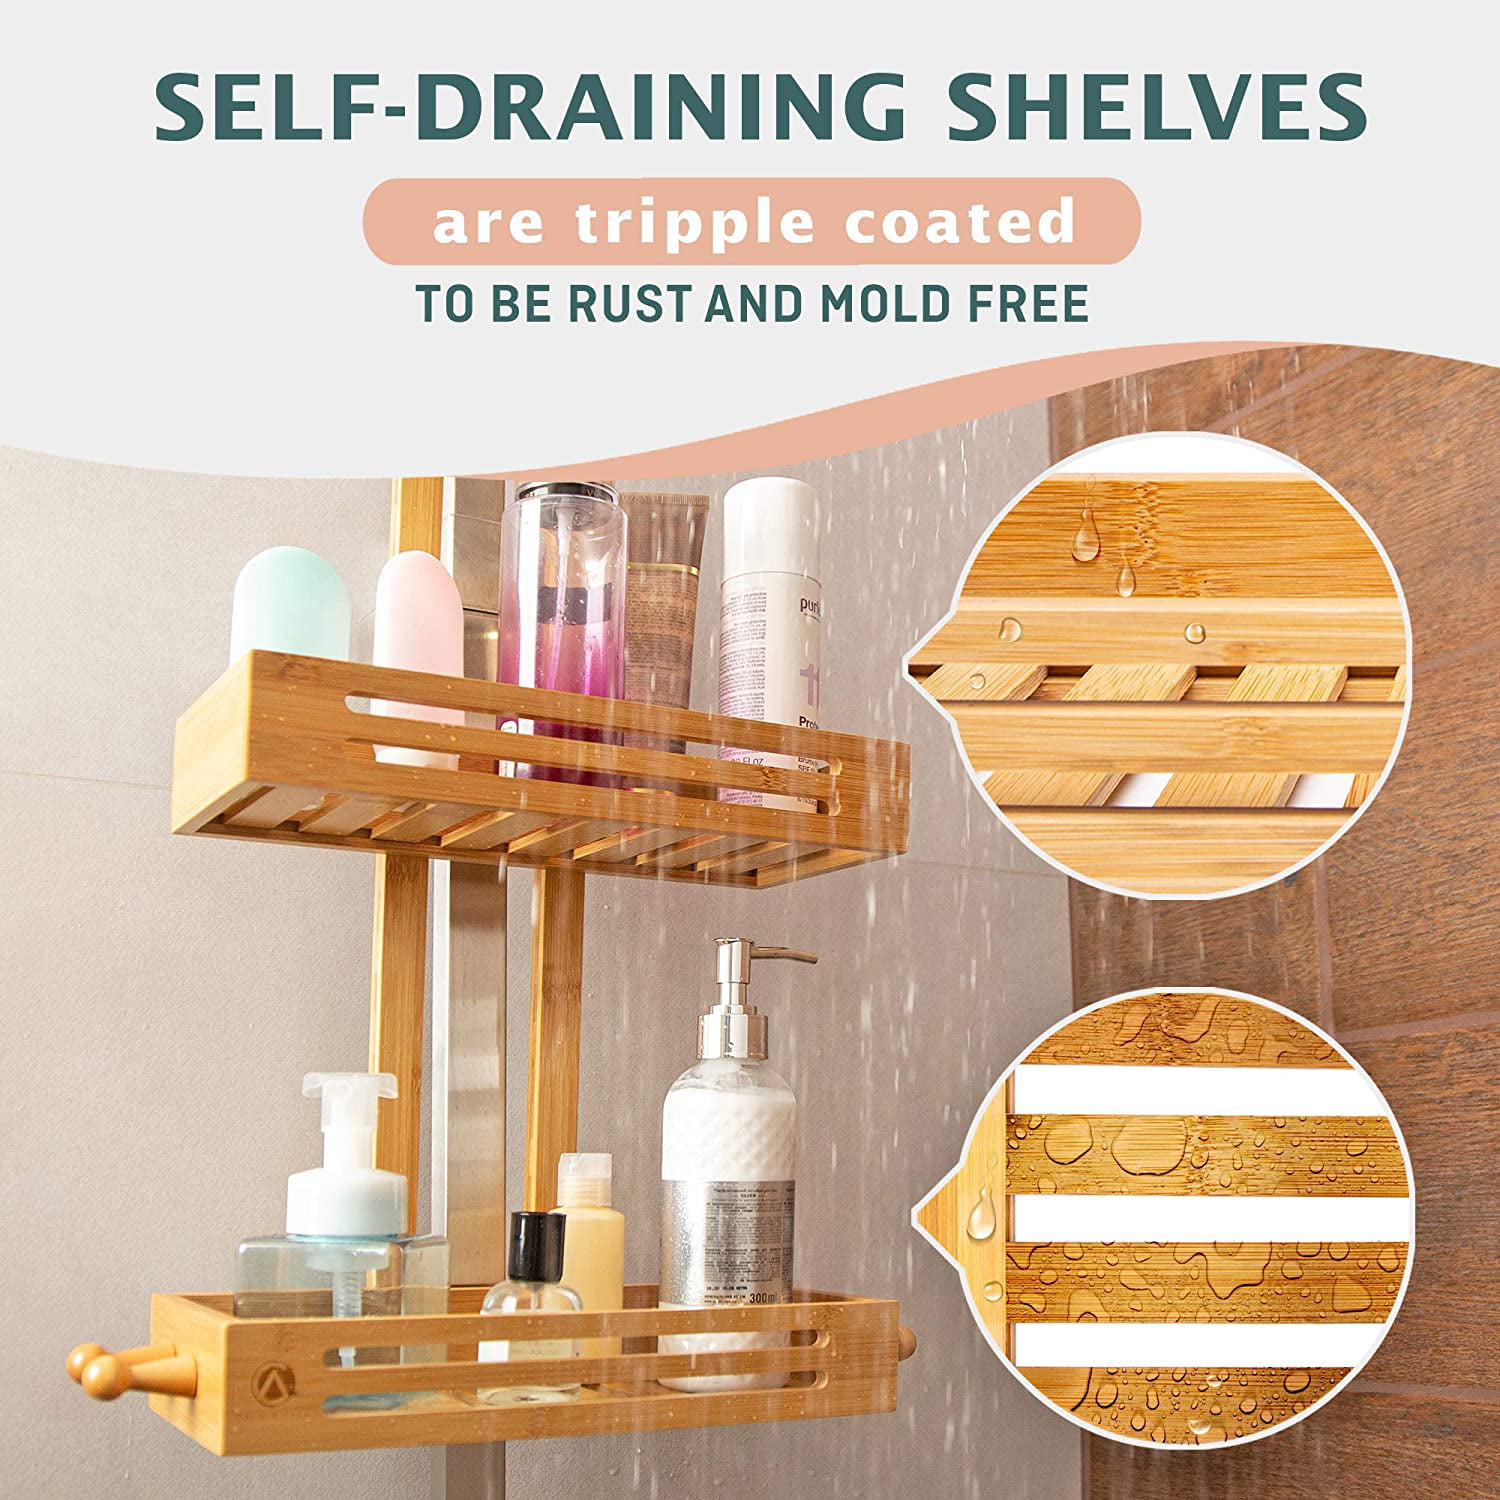 Honey-Can-Do Bamboo Hanging Shower Caddy ,Natural